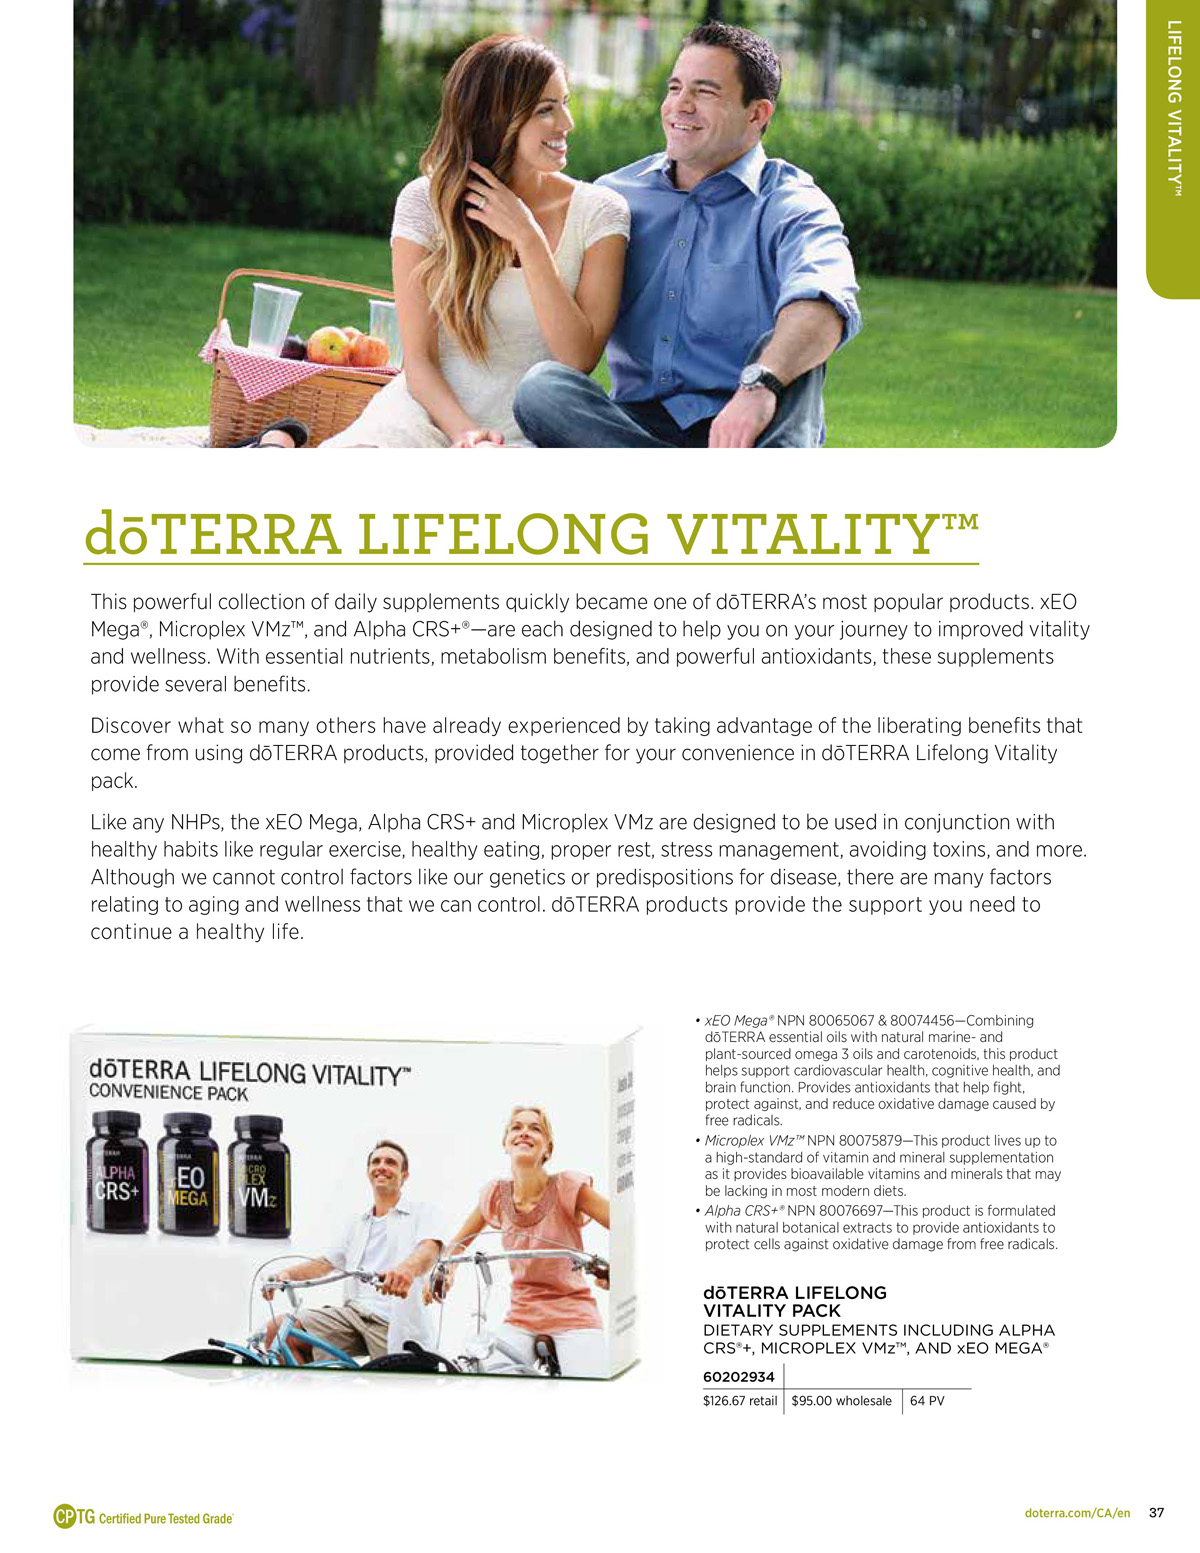 doterra product guide page 37